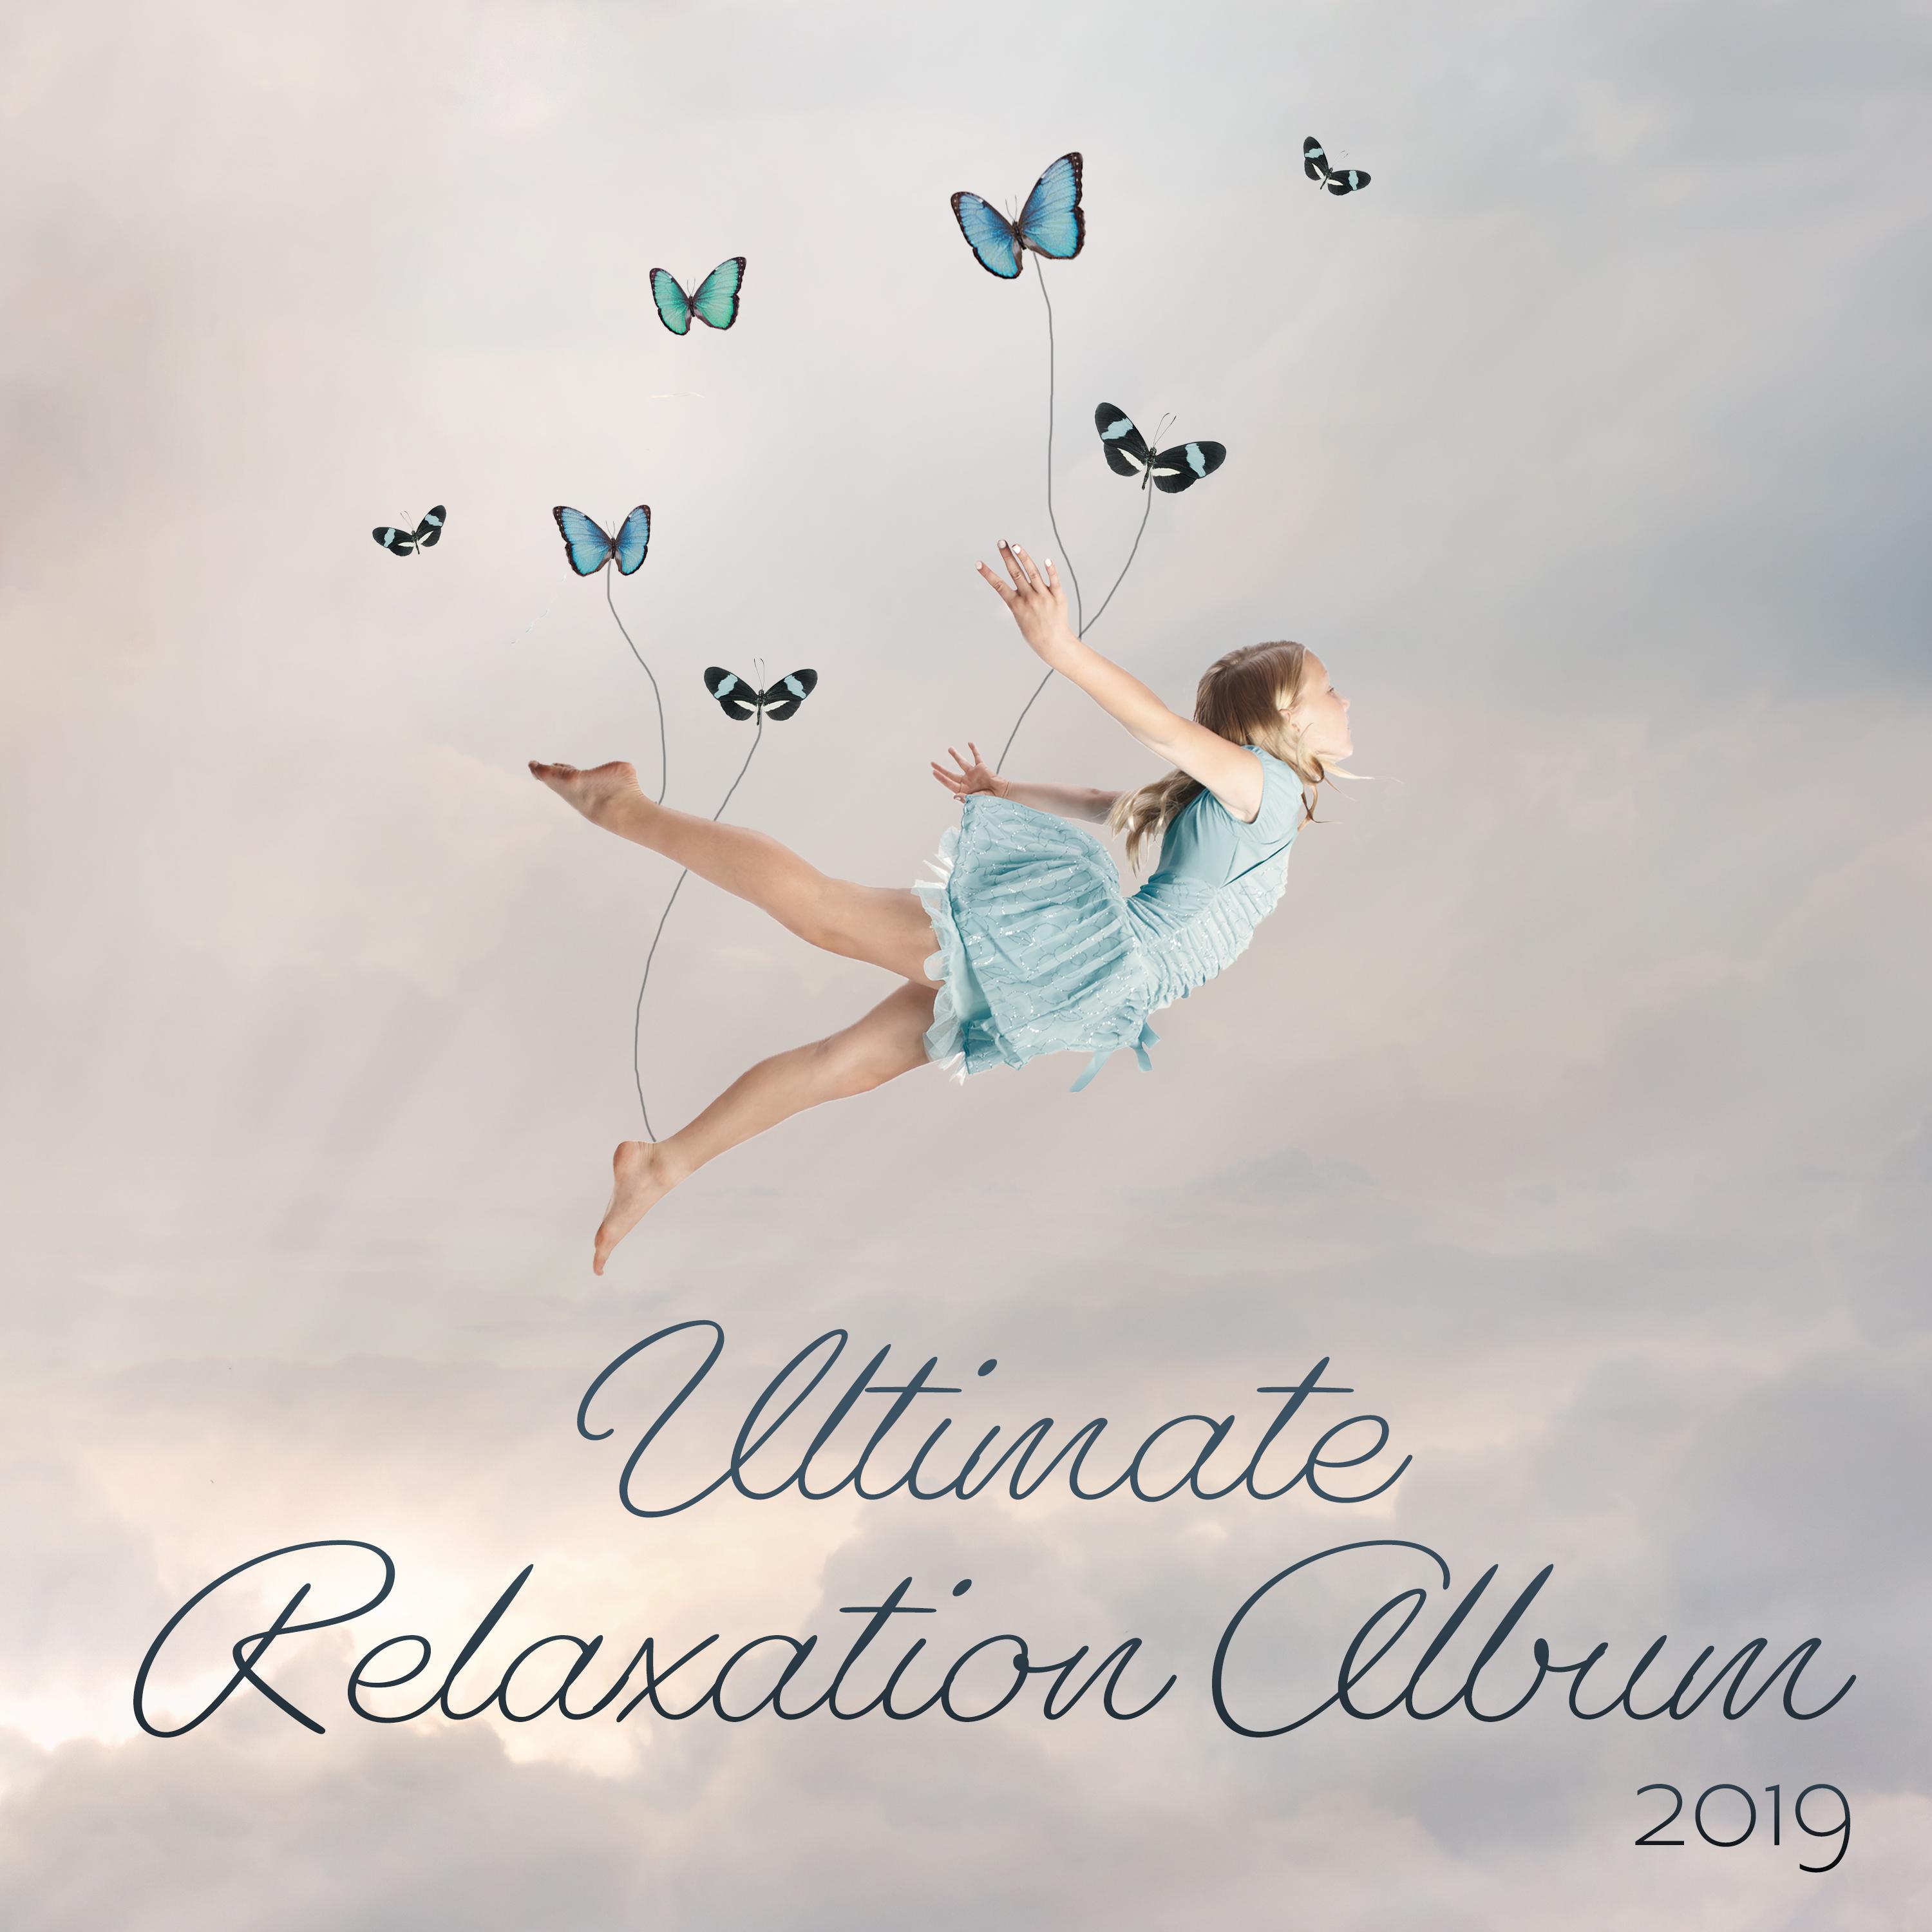 Ultimate Relaxation Album 2019 (Unreal and Sensitive Songs, Massage with Cannabis Oil, Spa, Meditation, Summer Yoga, Positive Visualization Future, Powerful Anti Stress)